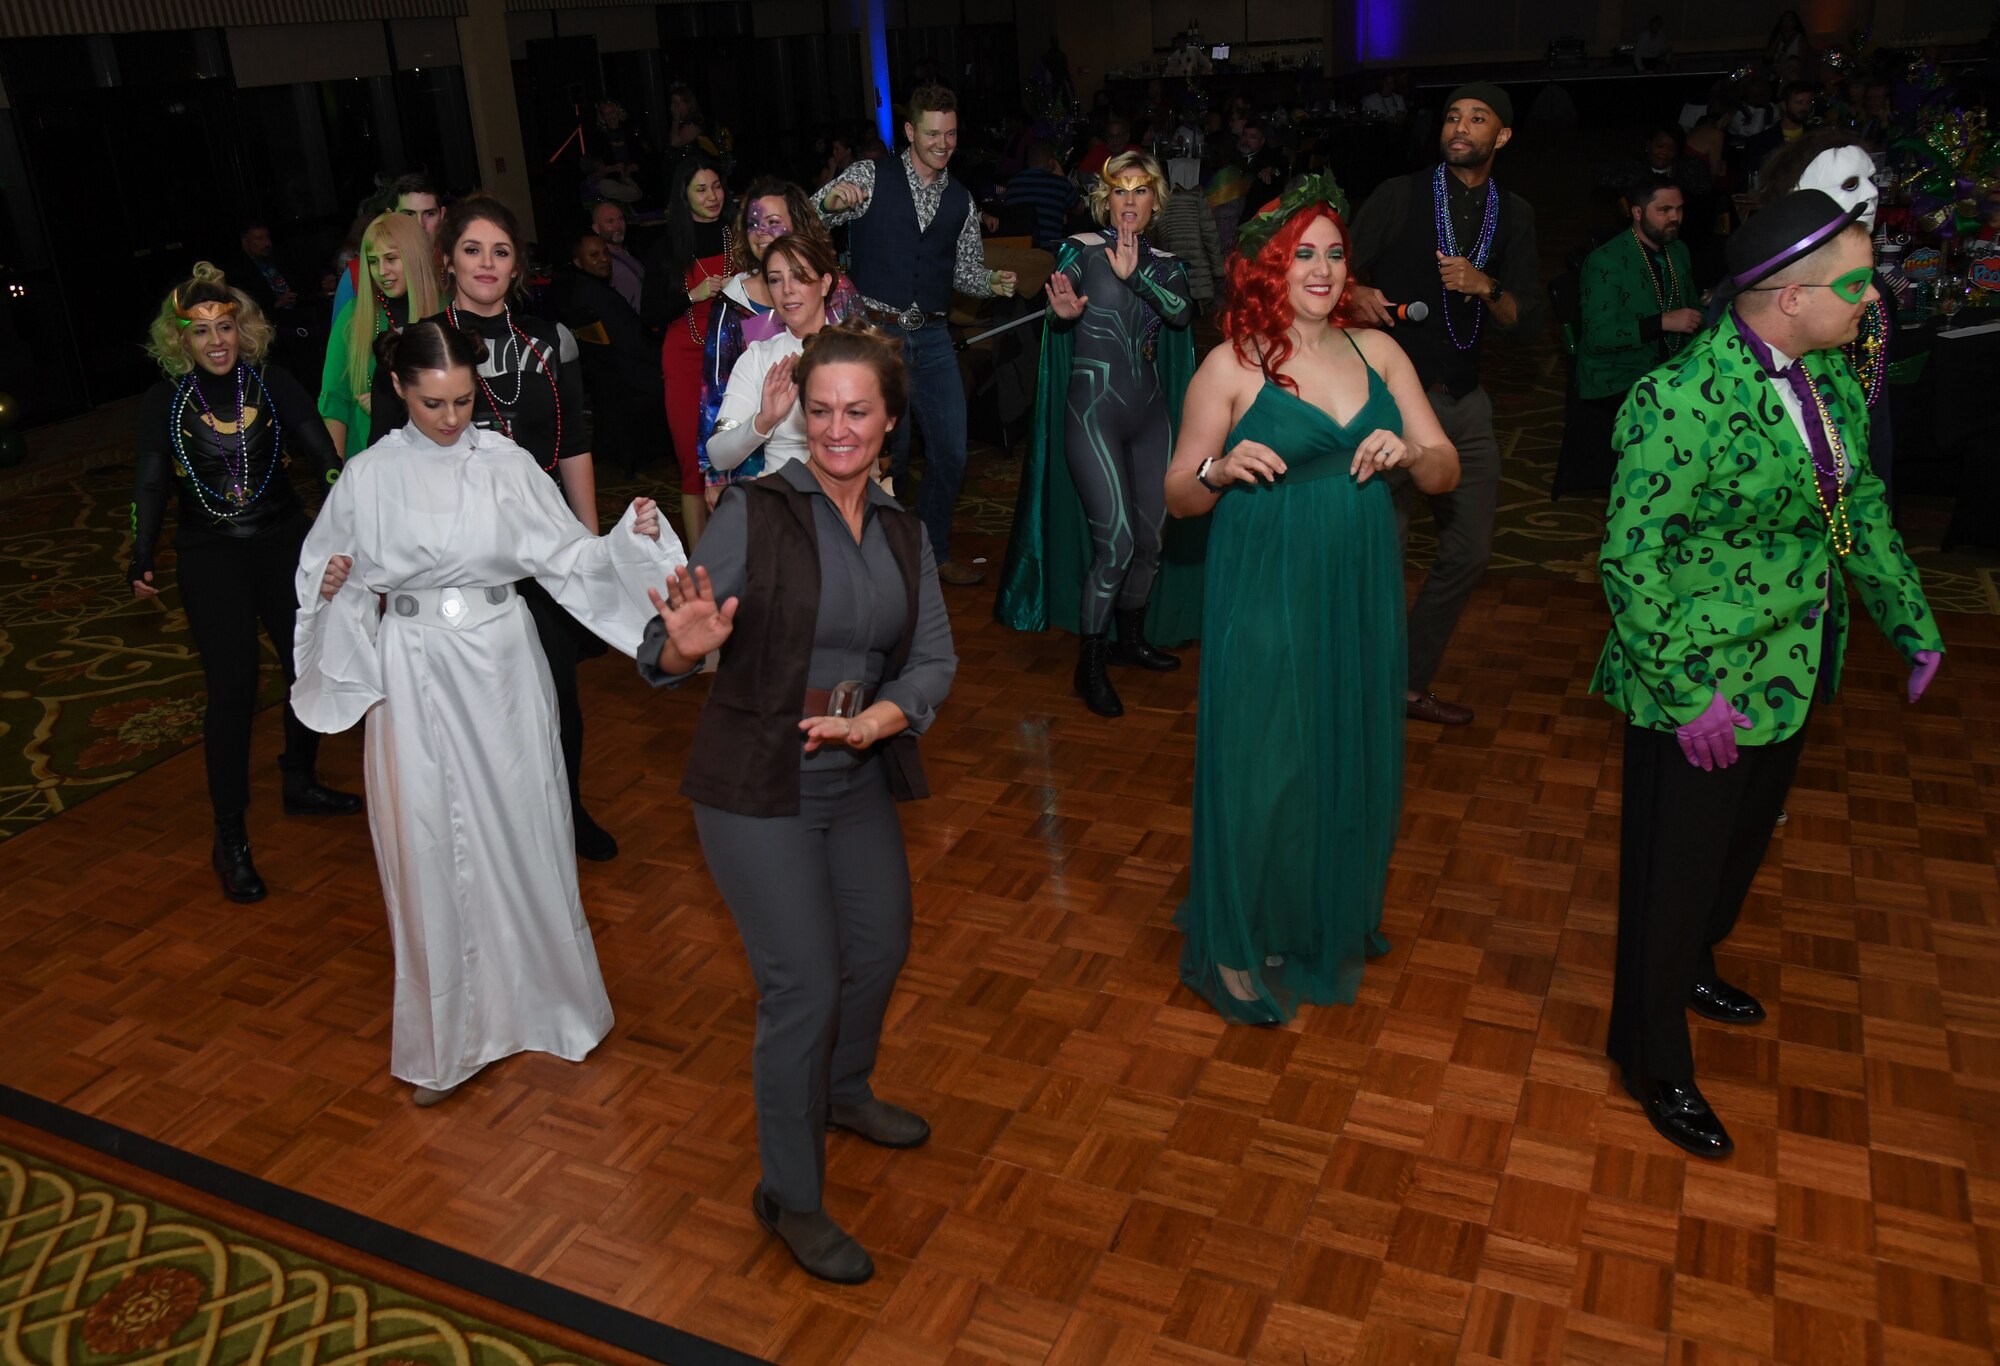 Members of the 81st Medical Group dance during the 32nd Annual Krewe of Medics Mardi Gras Ball at the Bay Breeze Event Center on Keesler Air Force Base, Mississippi, Feb. 11, 2023.